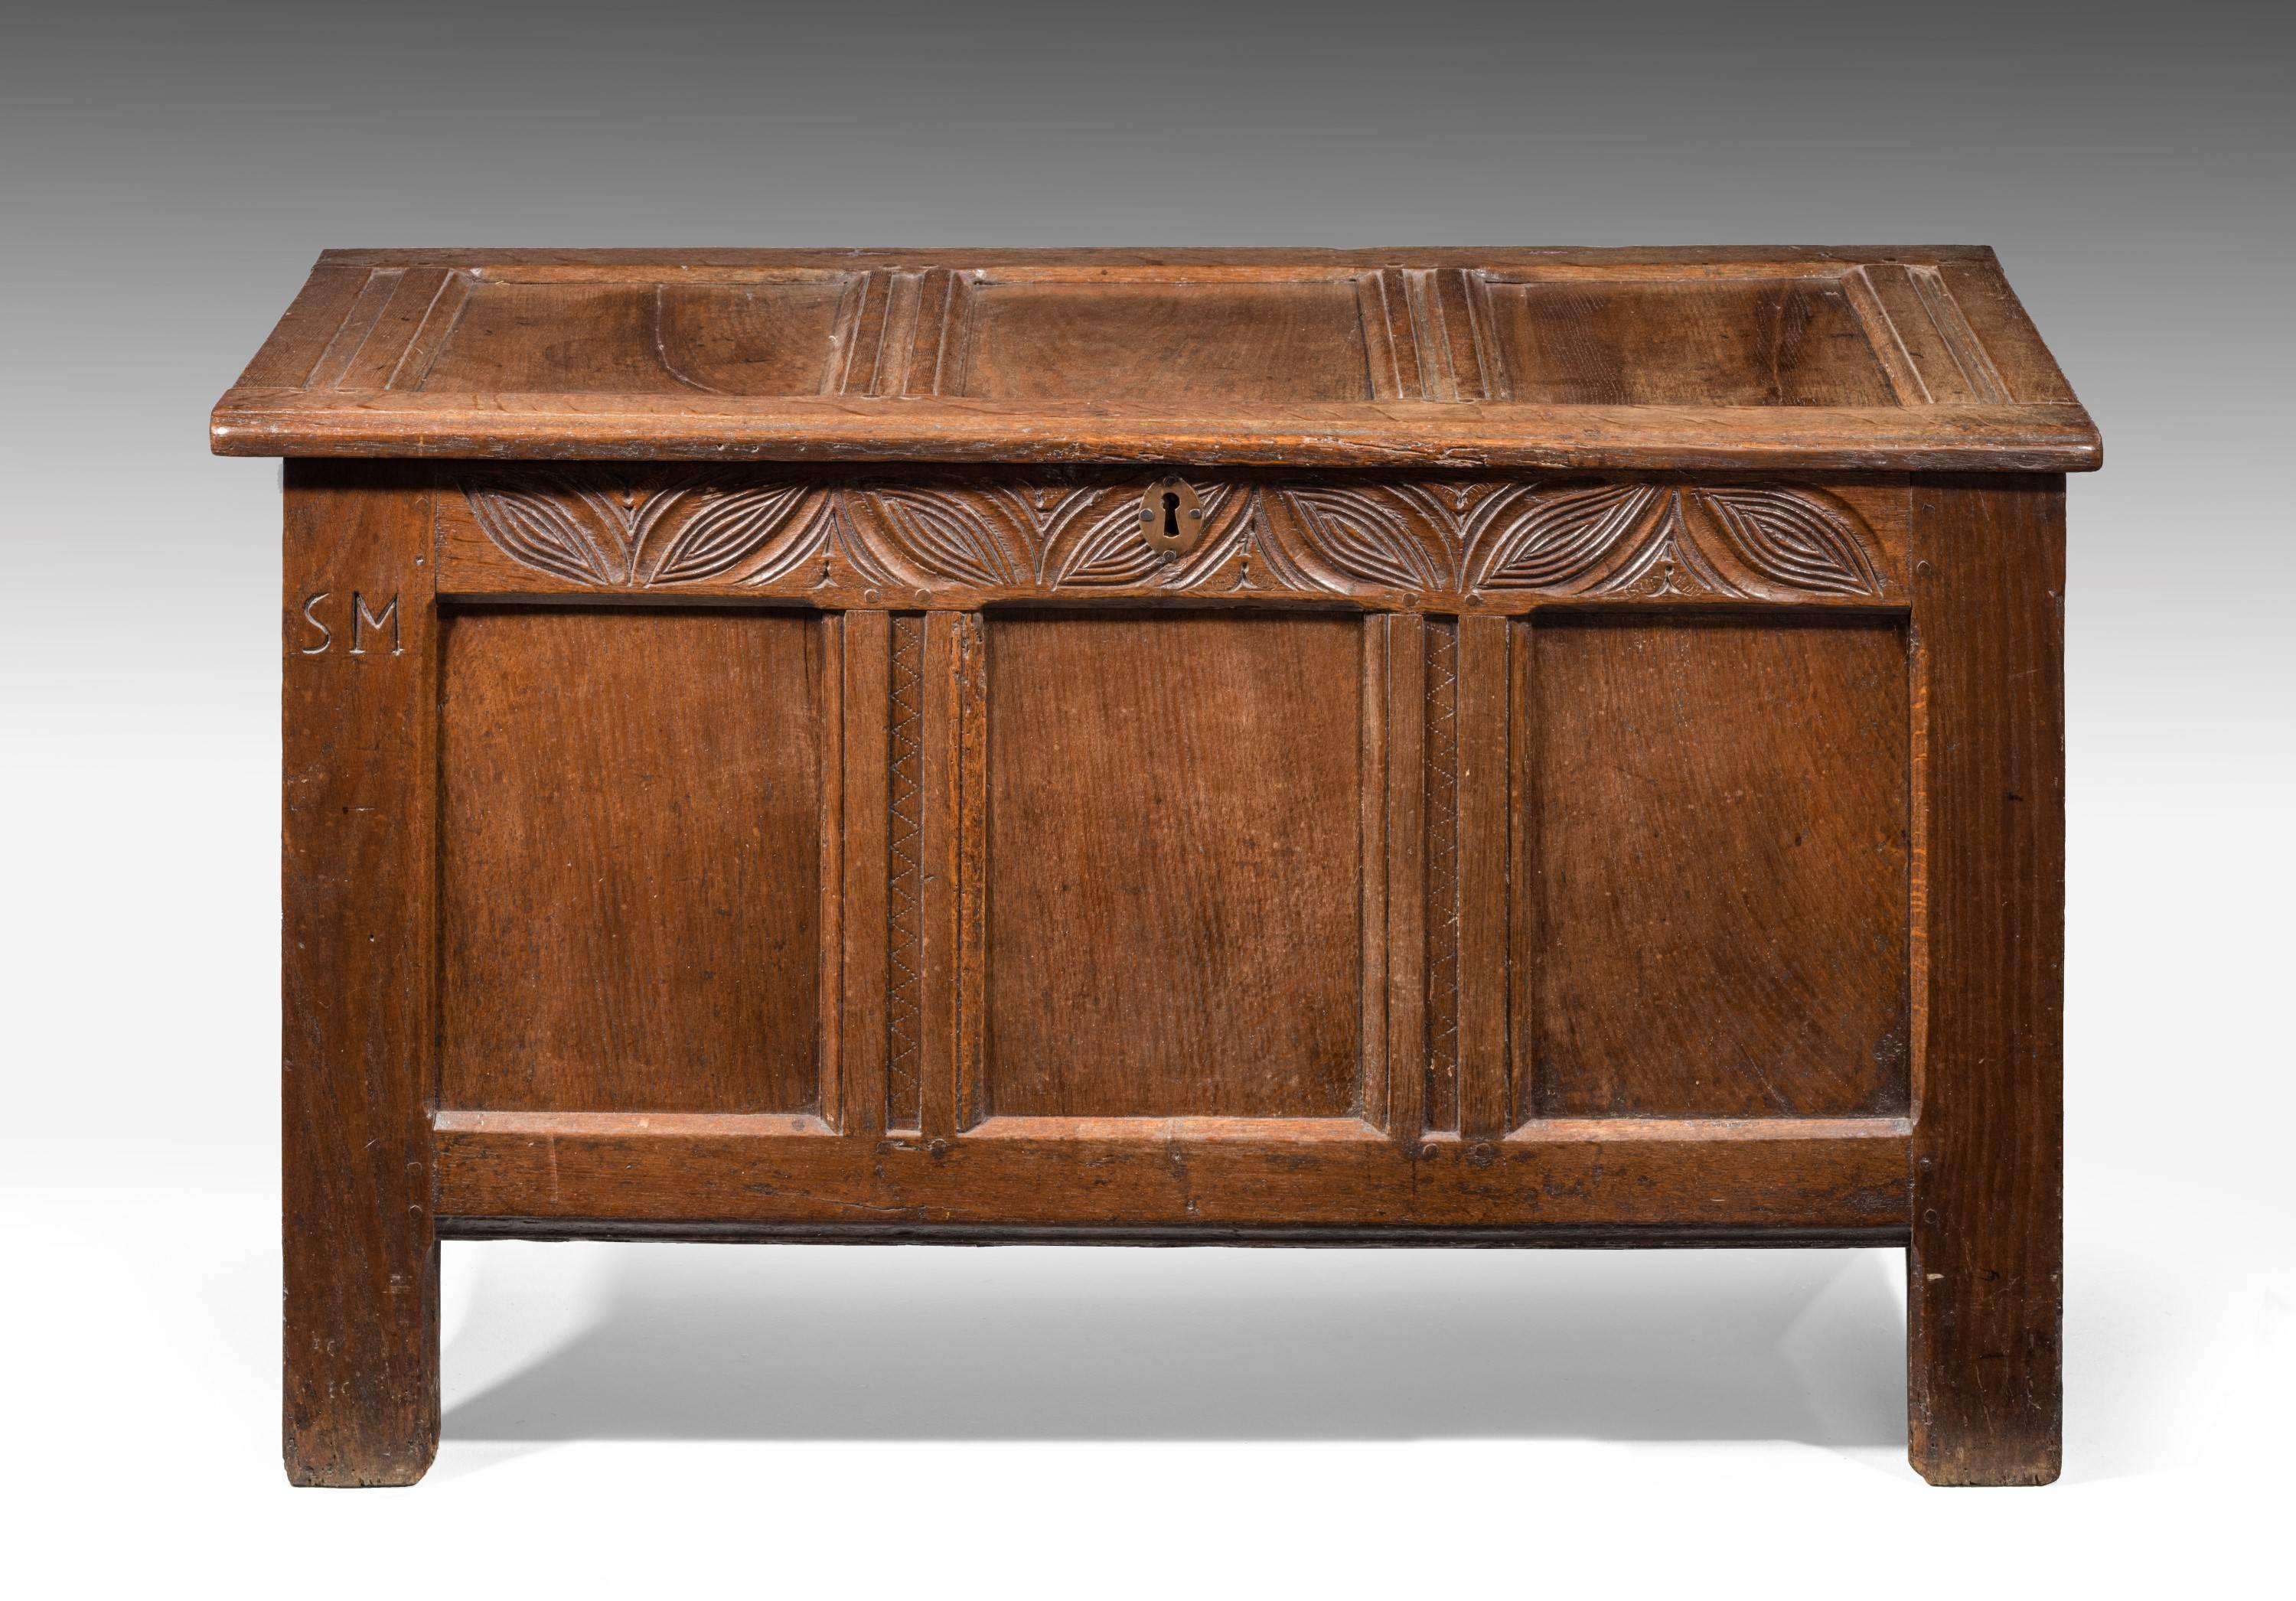 A early 18th century oak three-paneled Kist with a well carved top border. Replaced hinges.

A Kist (also called coffer or chest) is one of the oldest forms of furniture. It is typically a rectangular structure with four walls and a lift-able lid